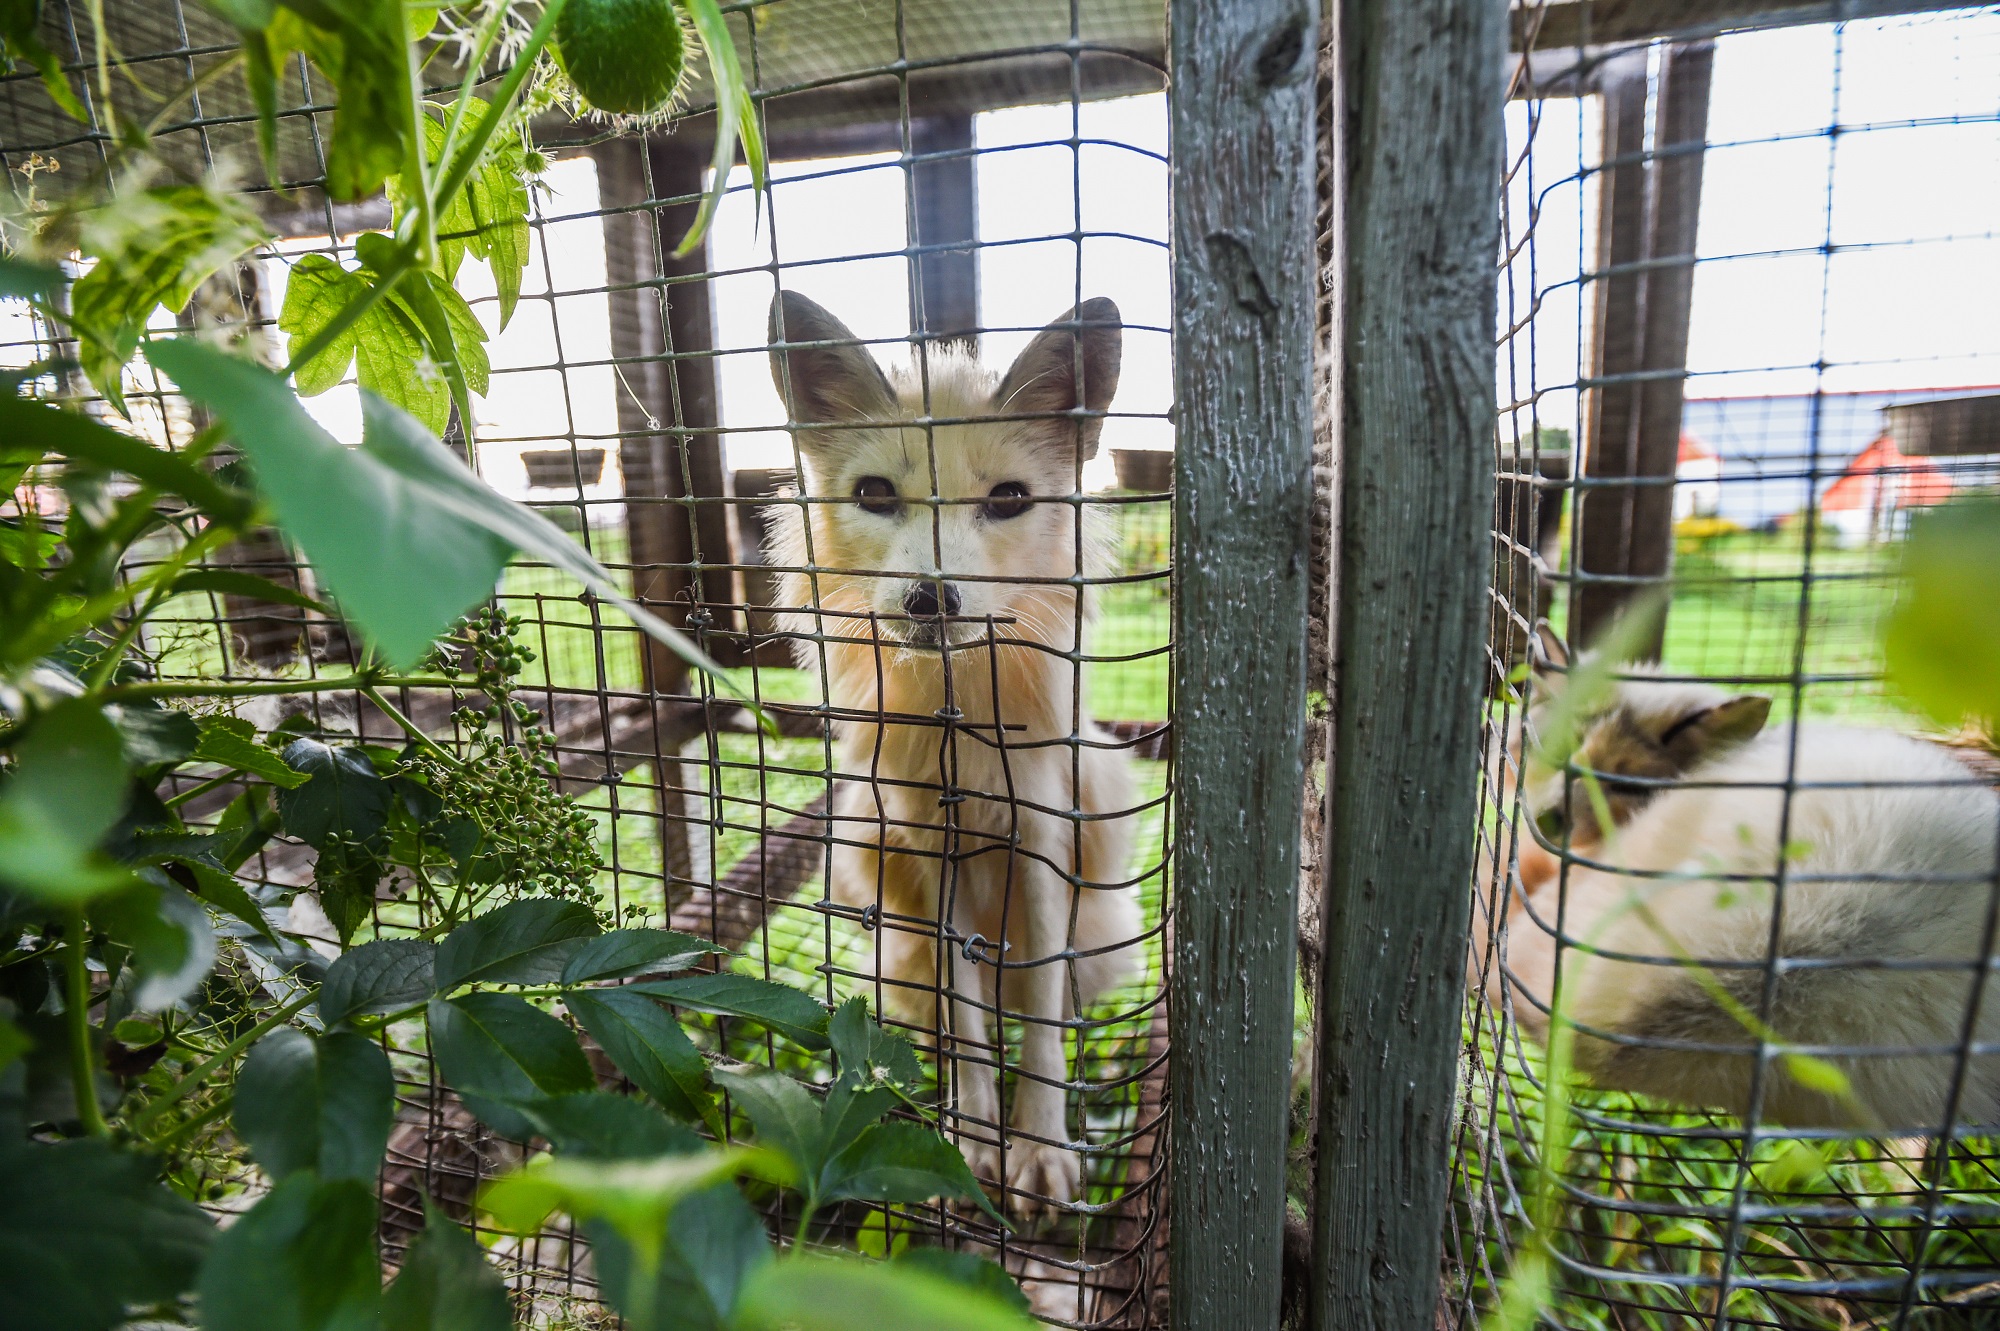 A farmed fox stares into the camera from inside their barren wire mesh cage at a fur farm in Quebec, Canada. In the neighbouring enclosure, another fox lies curled up atop the bare wire floor of their cage. These calico or marble-coated foxes spend their entire lives, and typically alone, inside these types of cages. They are used for breeding or will eventually themselves be killed for their fur.